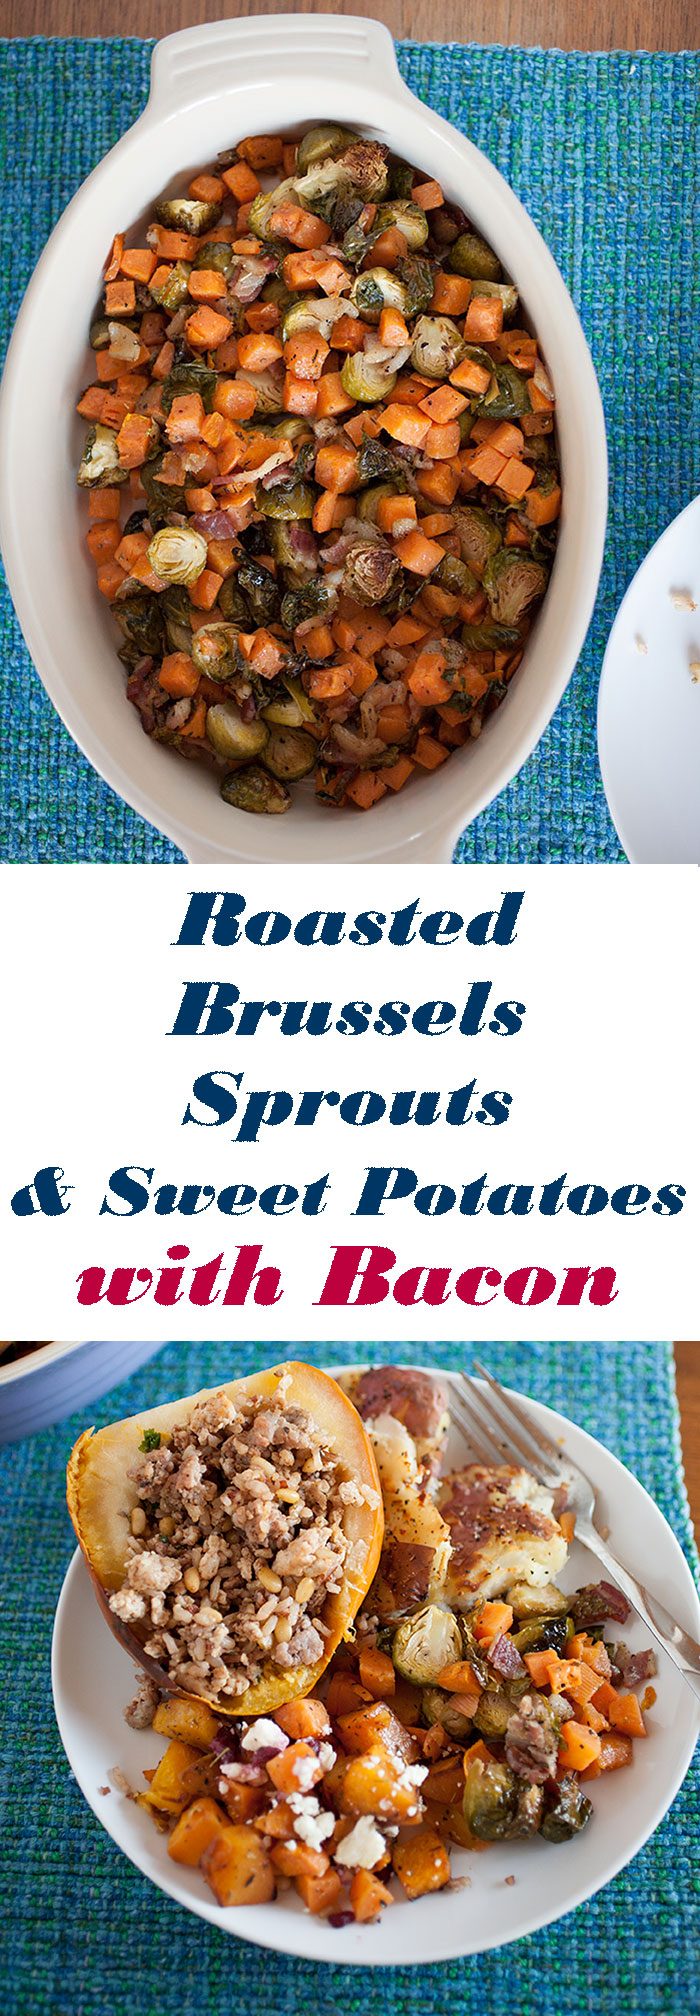 Savory Brussels sprouts with crisped edges mixed with creamy sweet potatoes and crispy, flavorful bacon makes the perfect easy-to-make Thanksgiving side dish! 